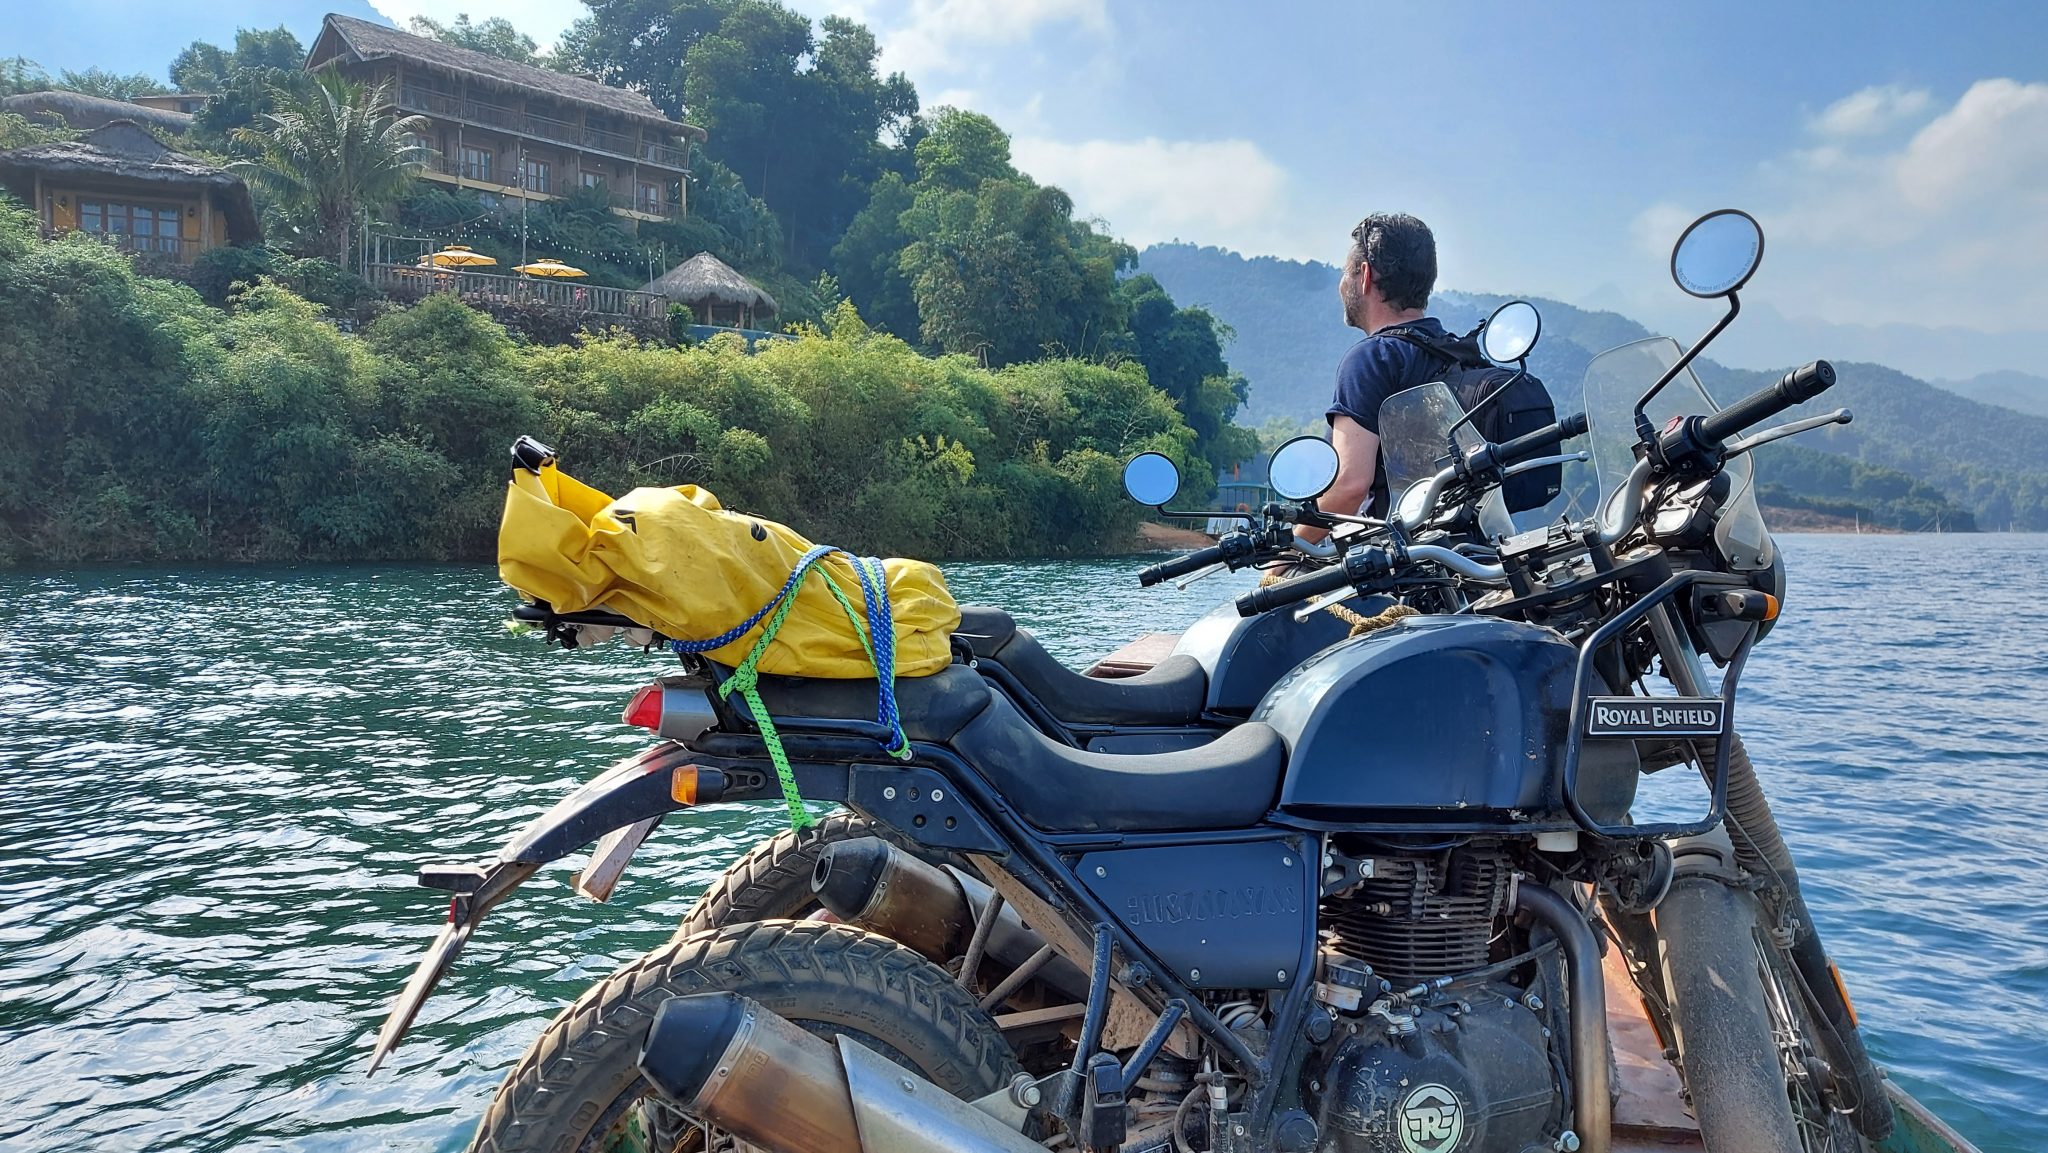 Digby from Explore Indochina taking his Himalayan across the water